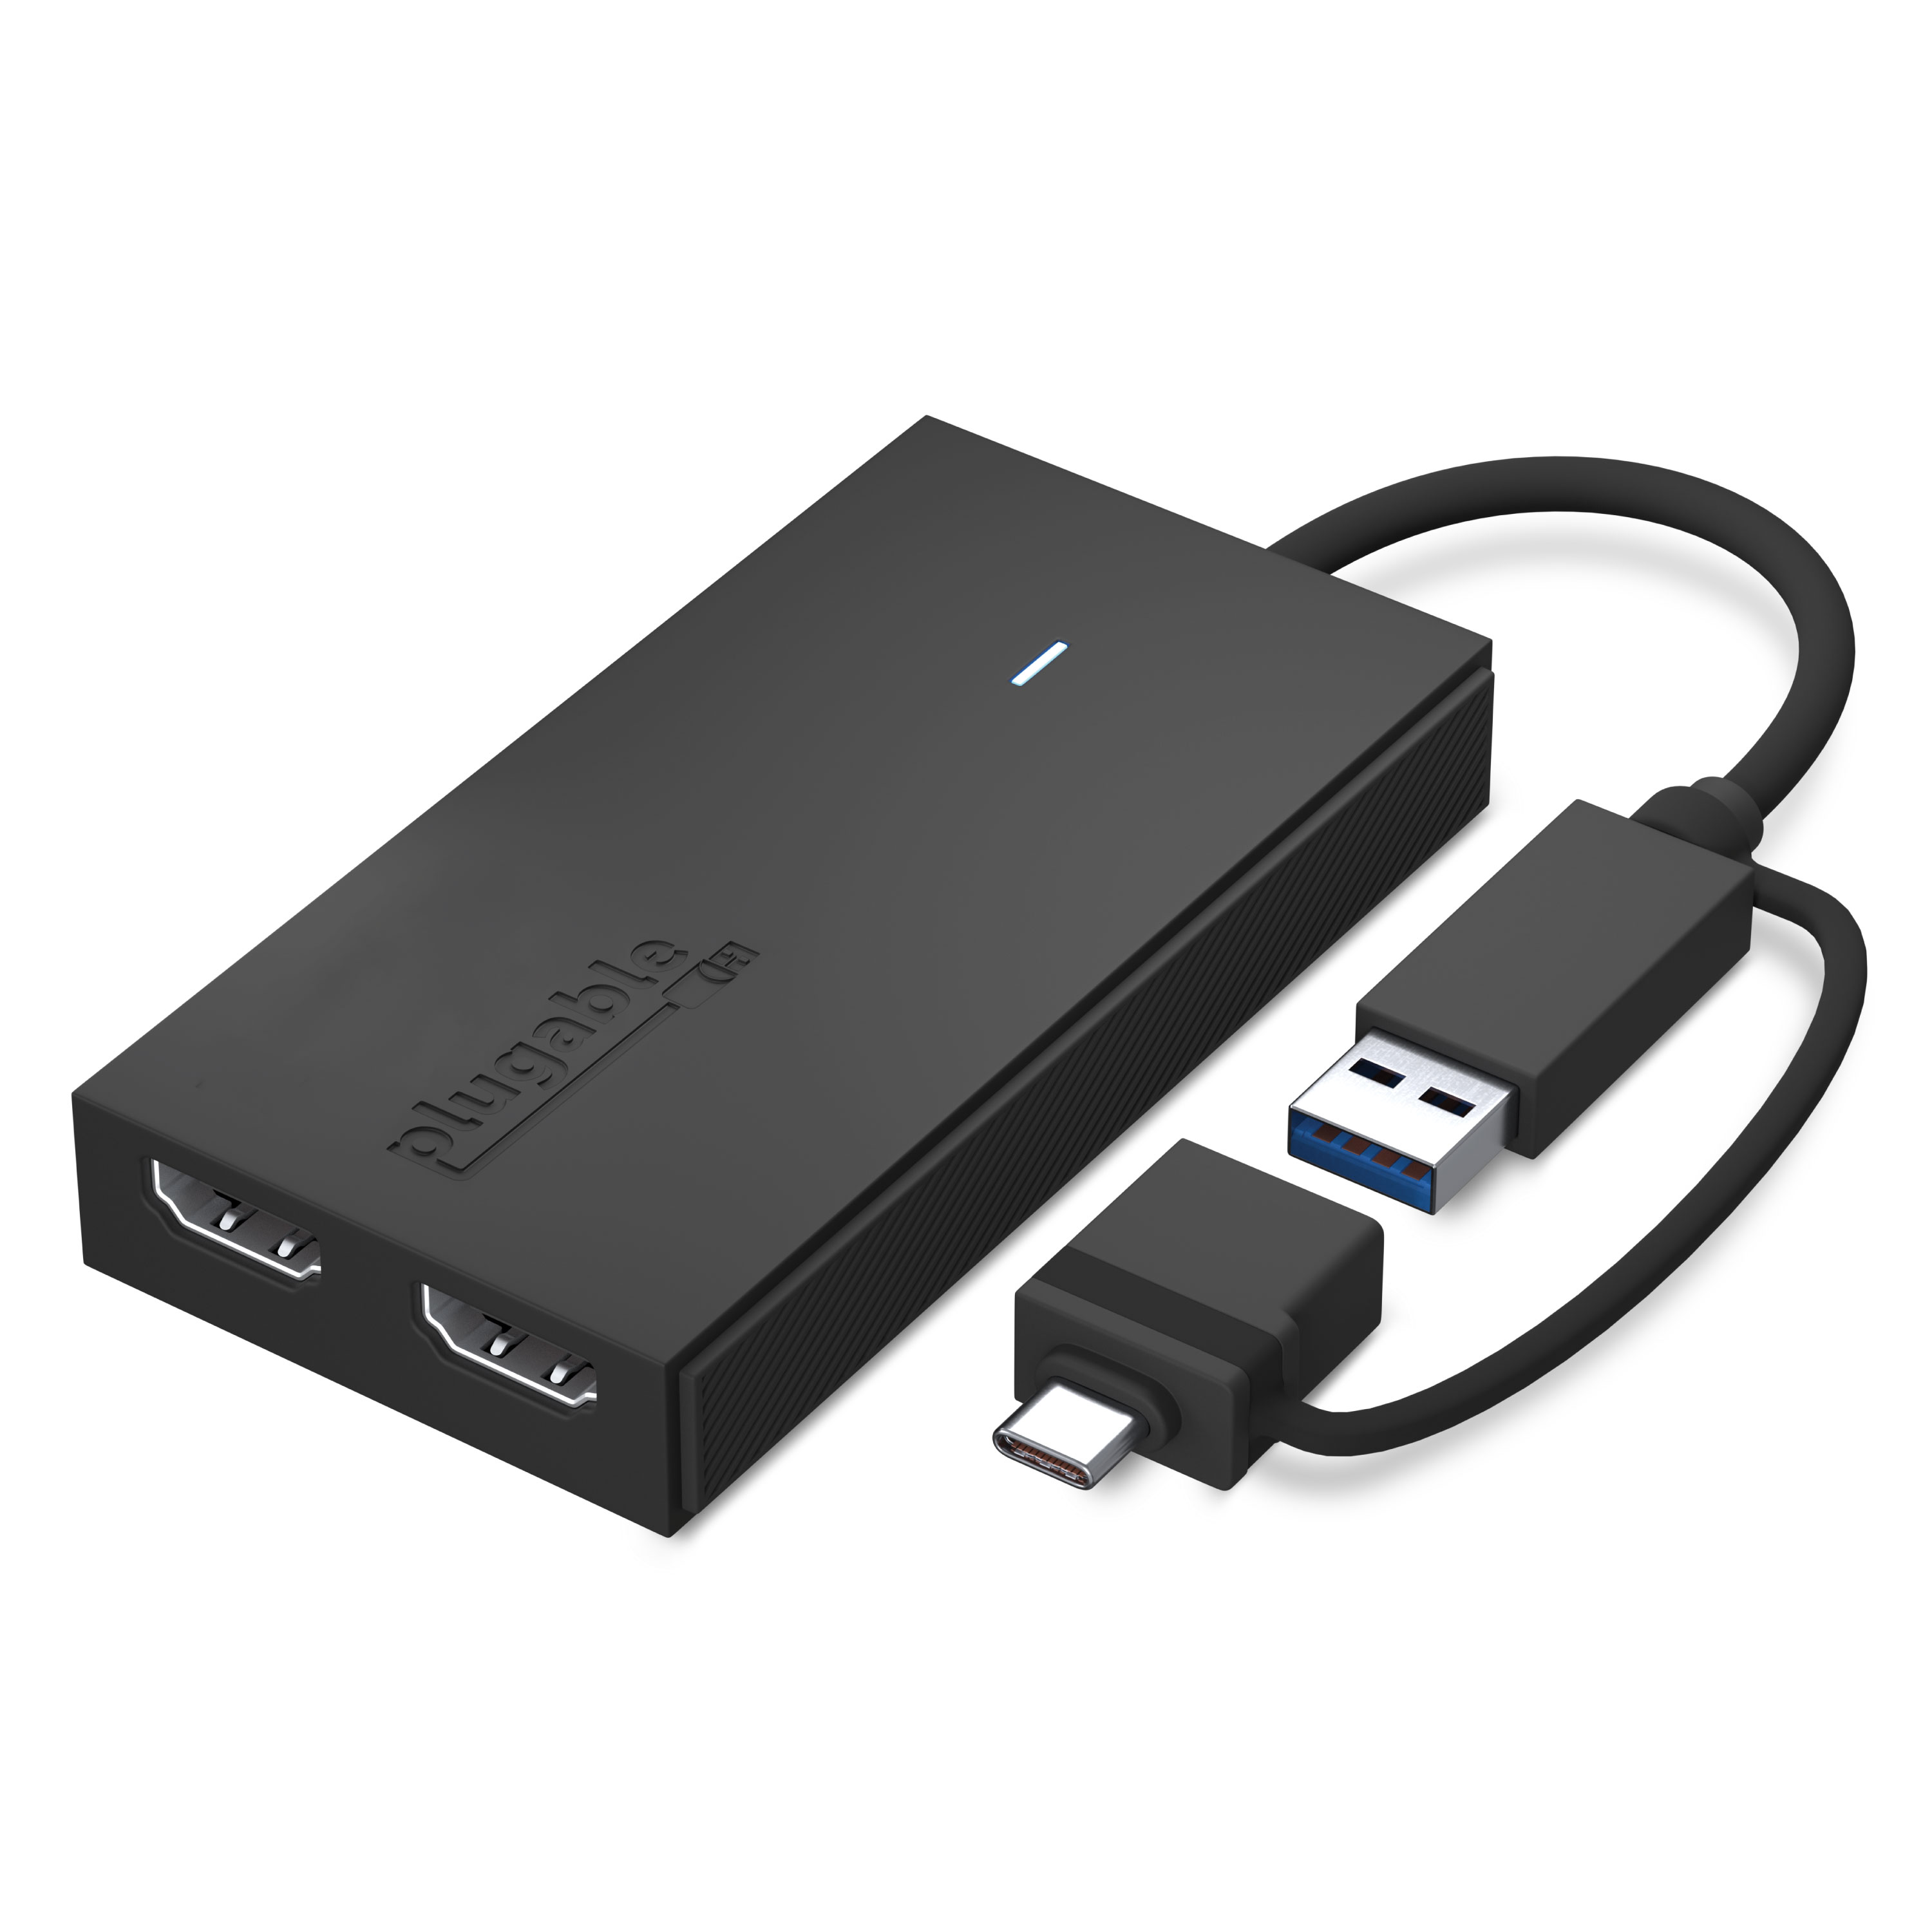 Plugable USB 3.0 or USB C to HDMI Adapter for Dual Monitors, Universal Video Graphics Adapter for Mac and Windows, Thunderbolt, USB 3.0 or USB-C - image 1 of 7